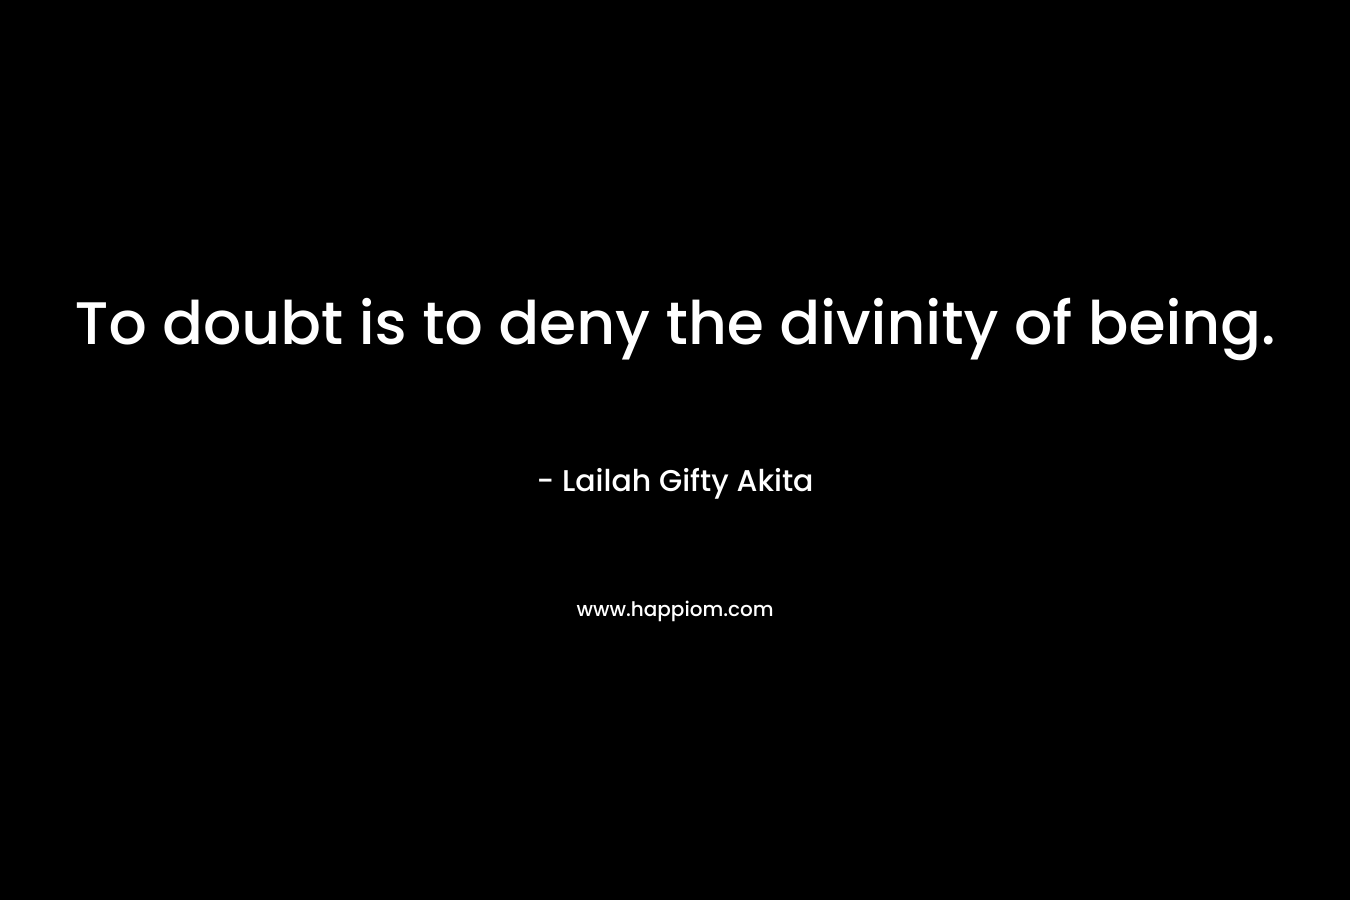 To doubt is to deny the divinity of being. – Lailah Gifty Akita